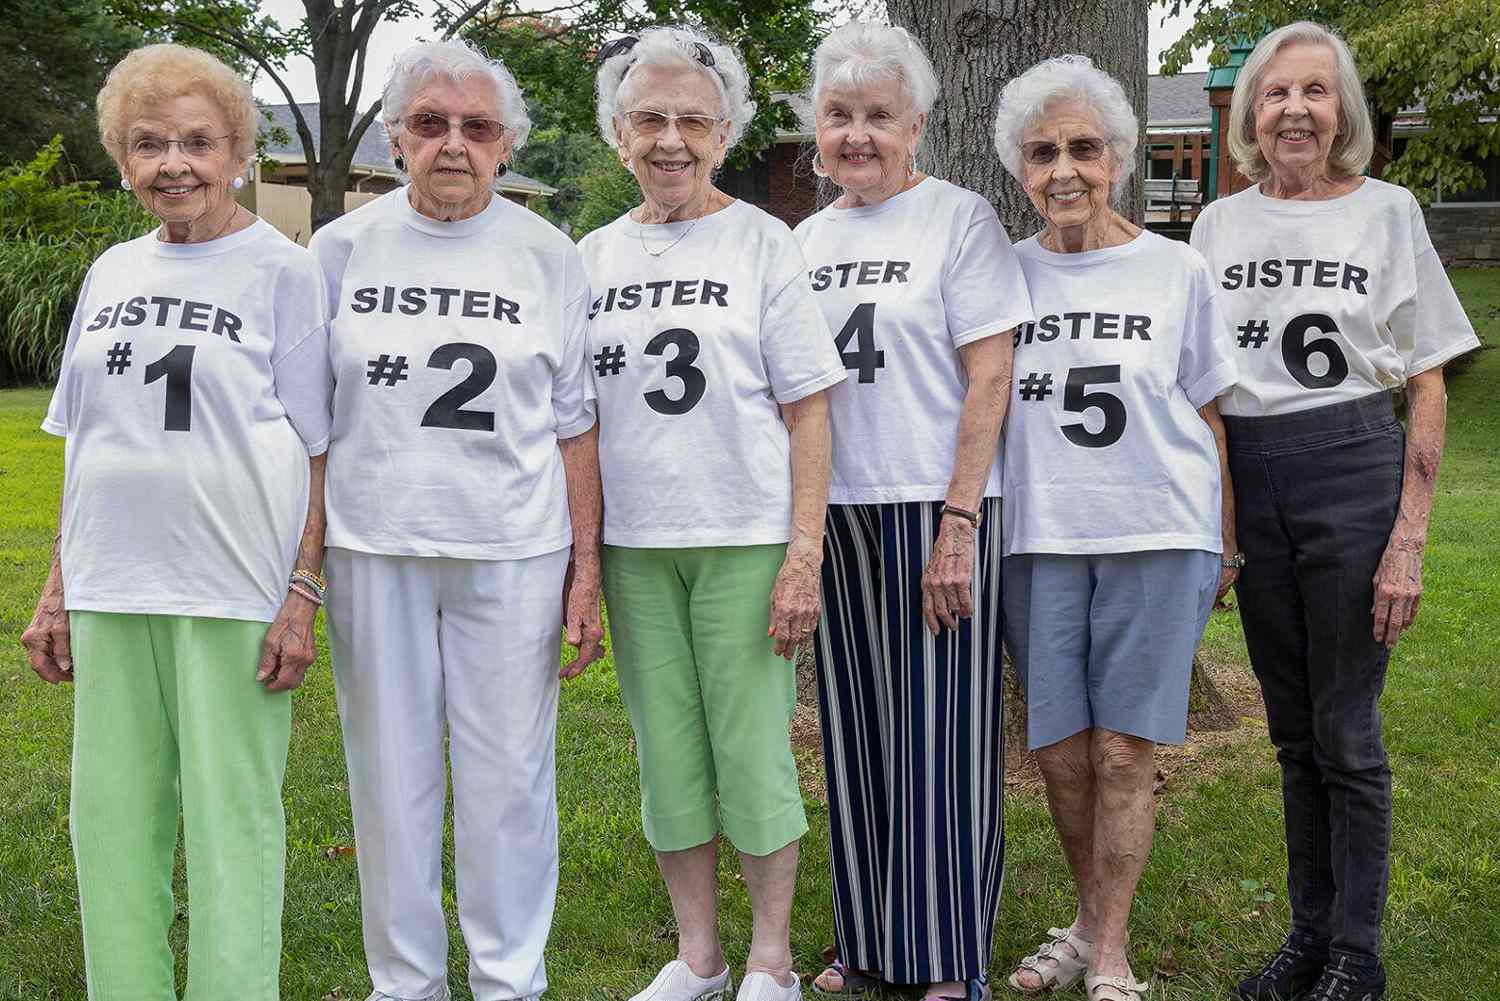 Missouri Sisters – Ages 88 to 101 – Earn World Record for Having a Combined Age of 571!